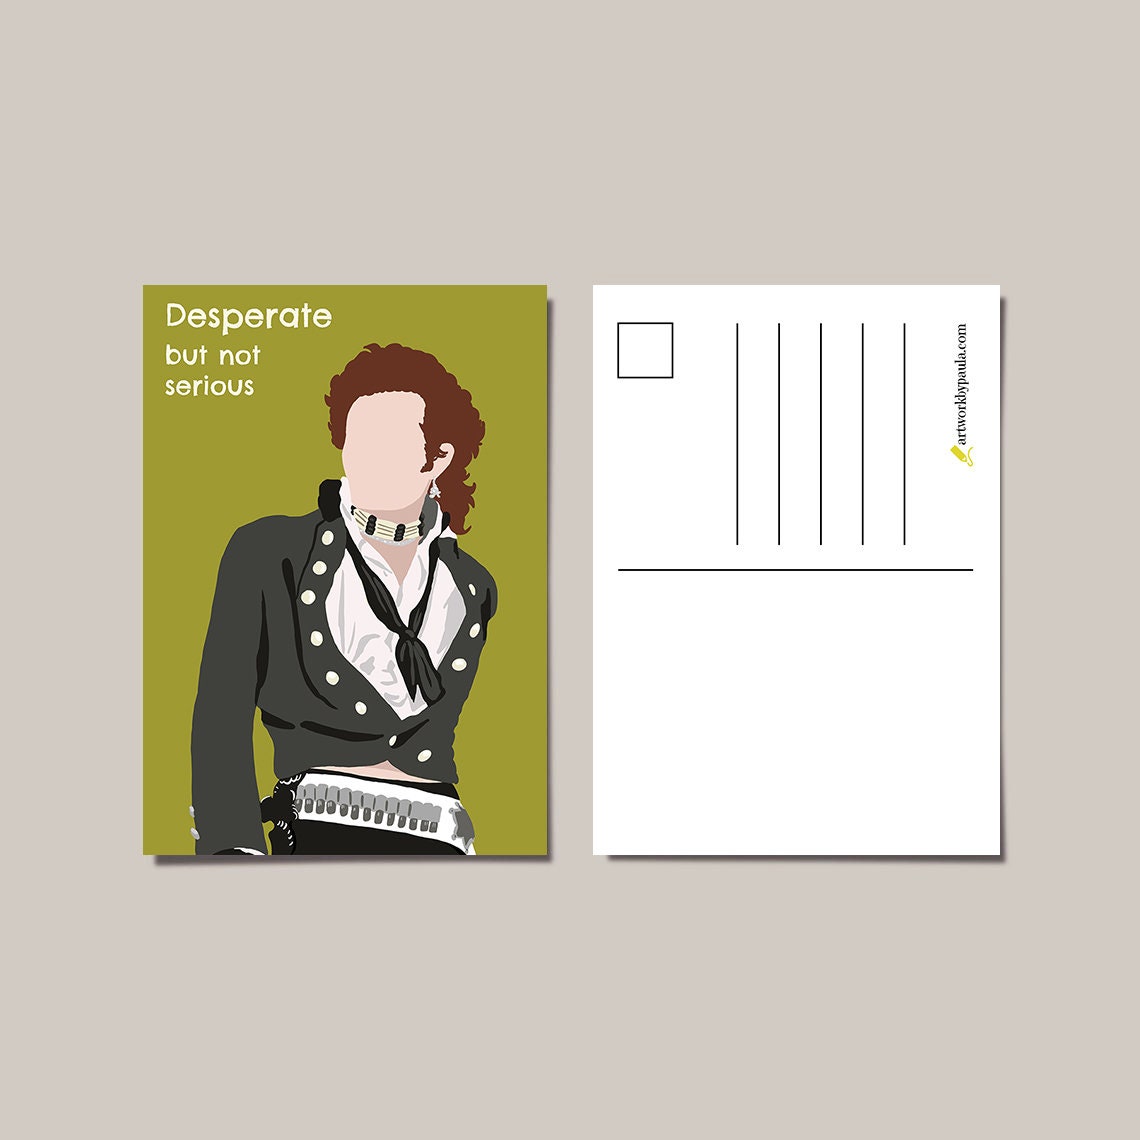 Adam Ant inspired postcards, set of 4, music postcard, new romantic card, 80s music, gift for new wave music fan, Adam and the Ants